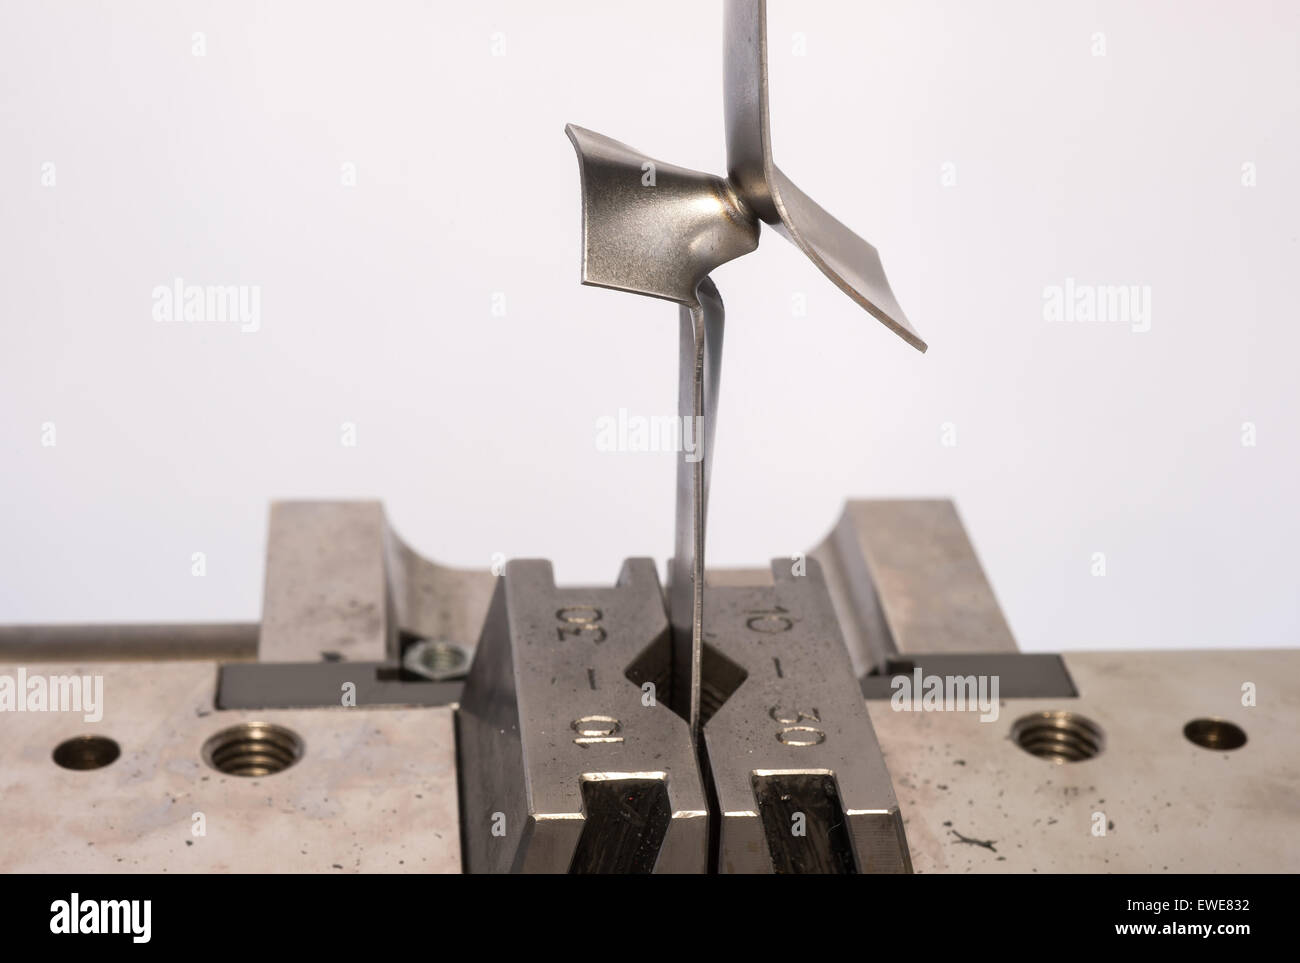 Berlin, Germany, tensile shear at a spot welding sample nter laboratory conditions Stock Photo